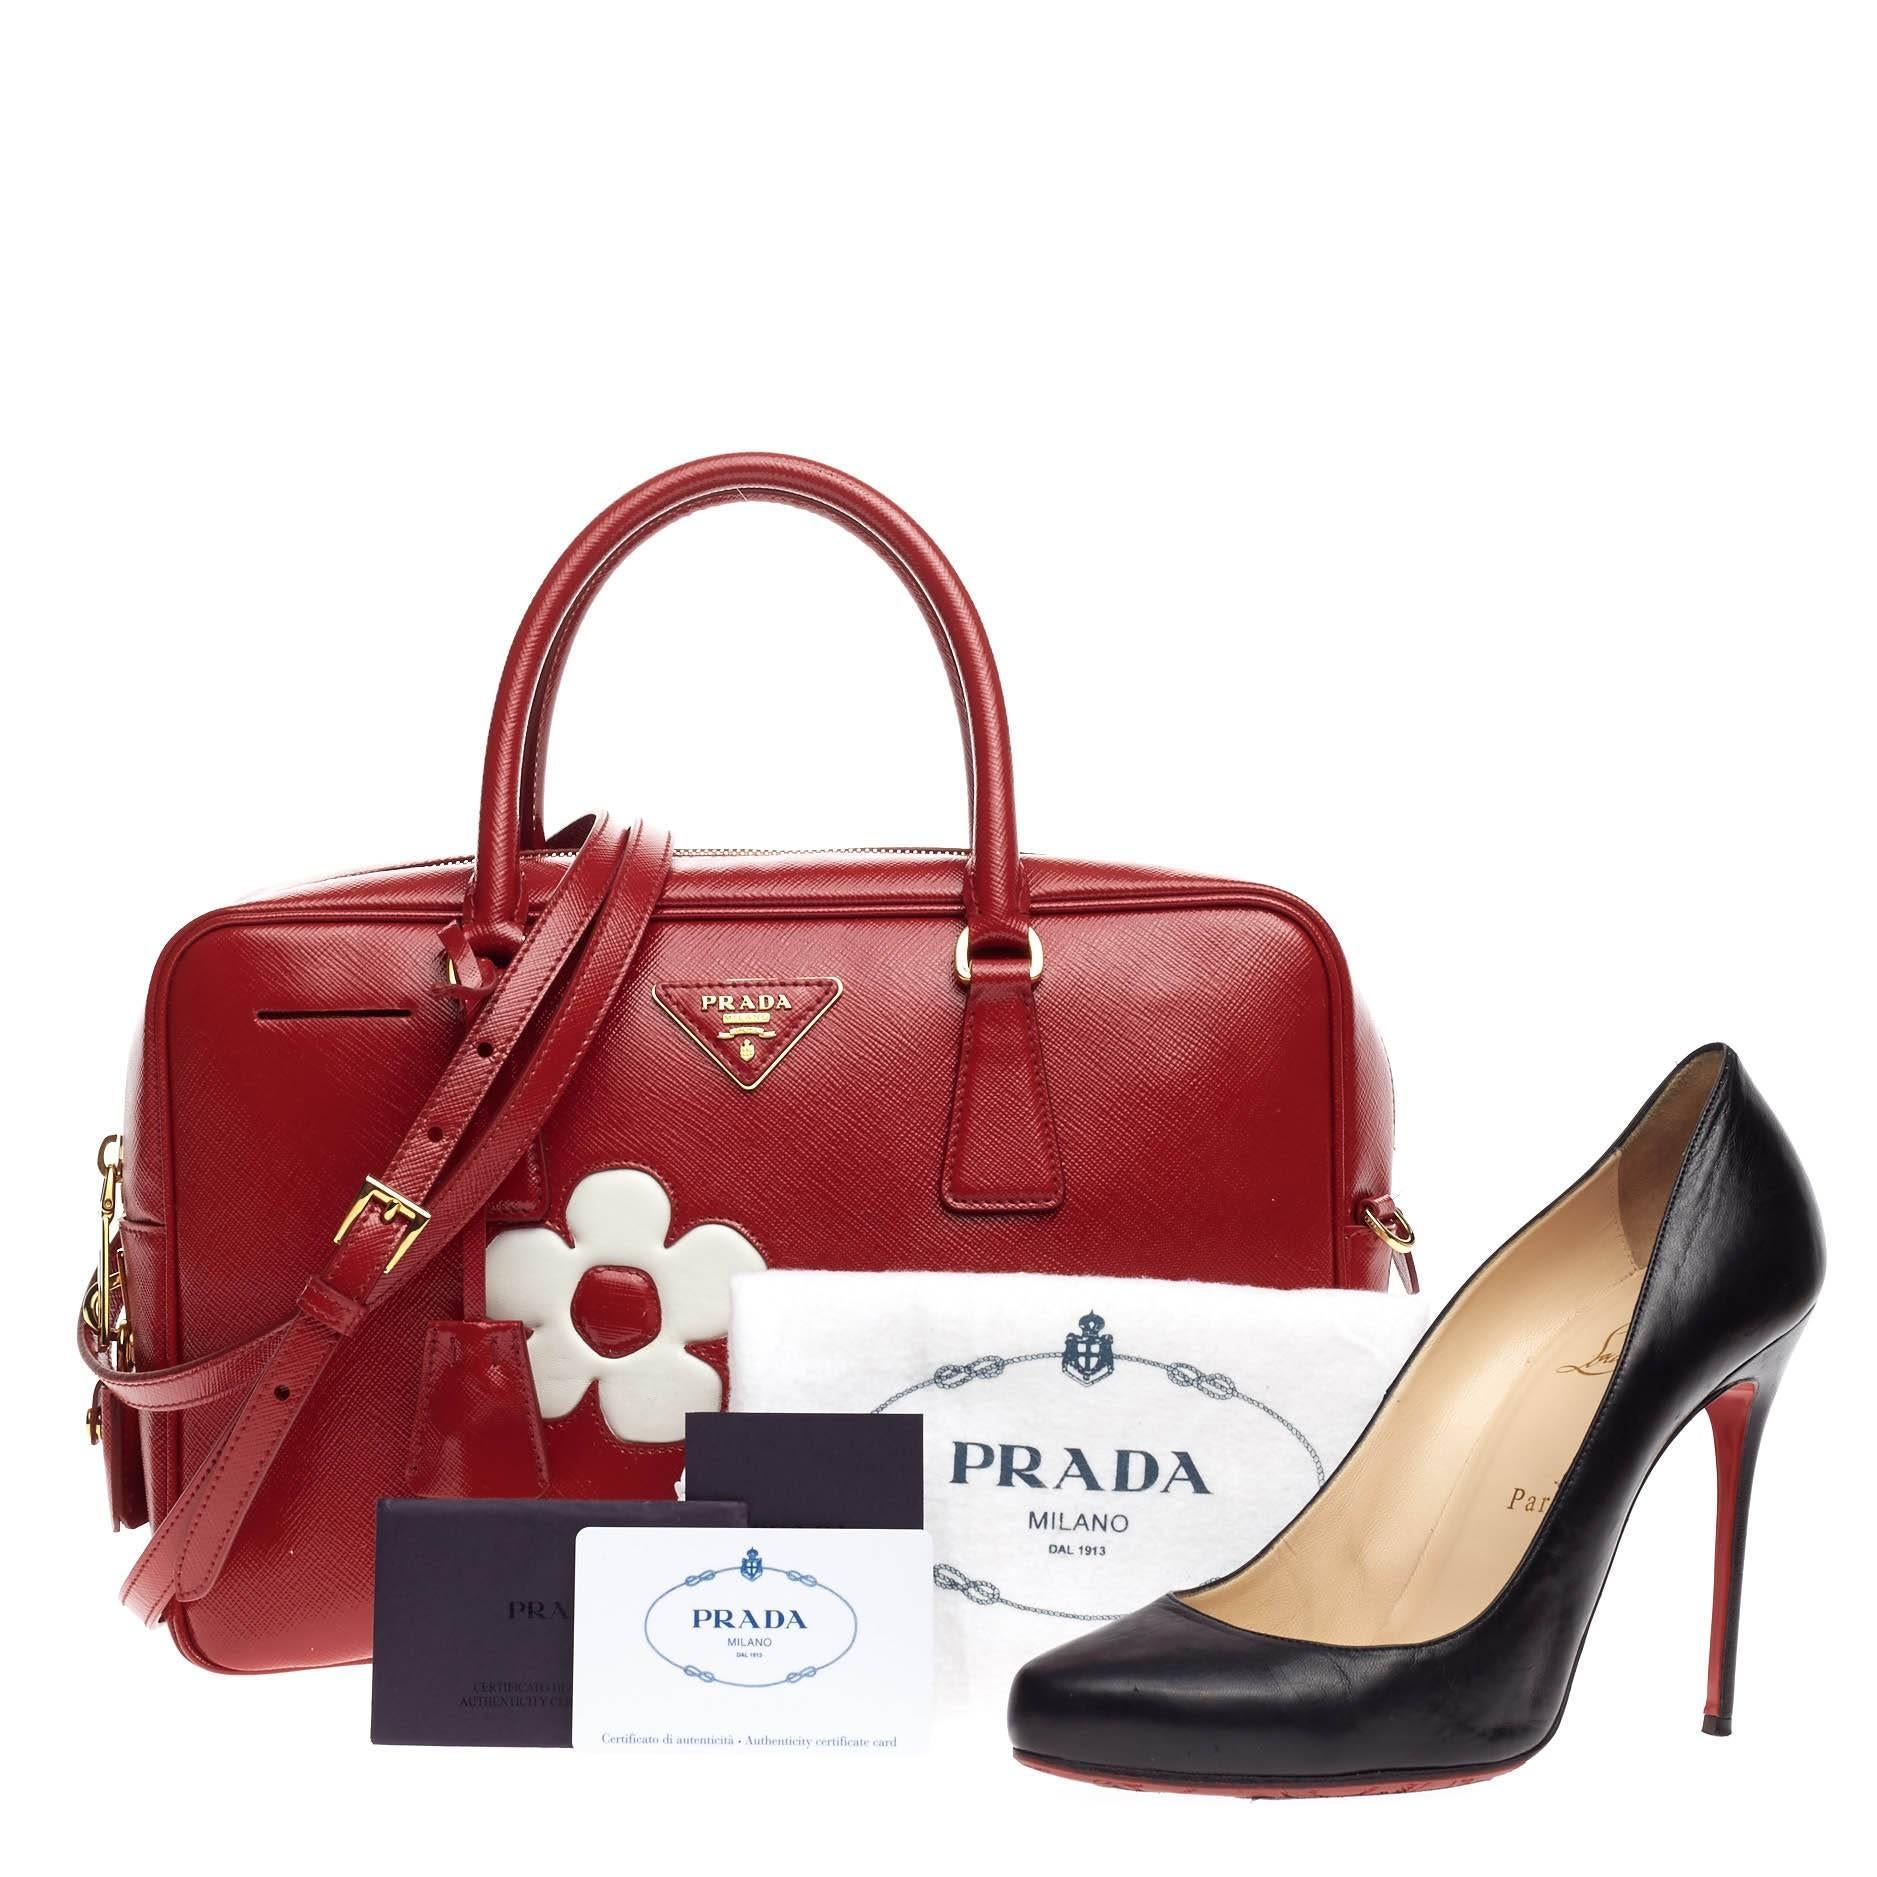 This authentic Prada Flowers Bauletto Vernice Saffiano Leather Medium exudes a stylish and industrial design made for everyday excursions. Crafted from rosso bianco red textured saffiano vernice patent leather and white smooth leather, this satchel